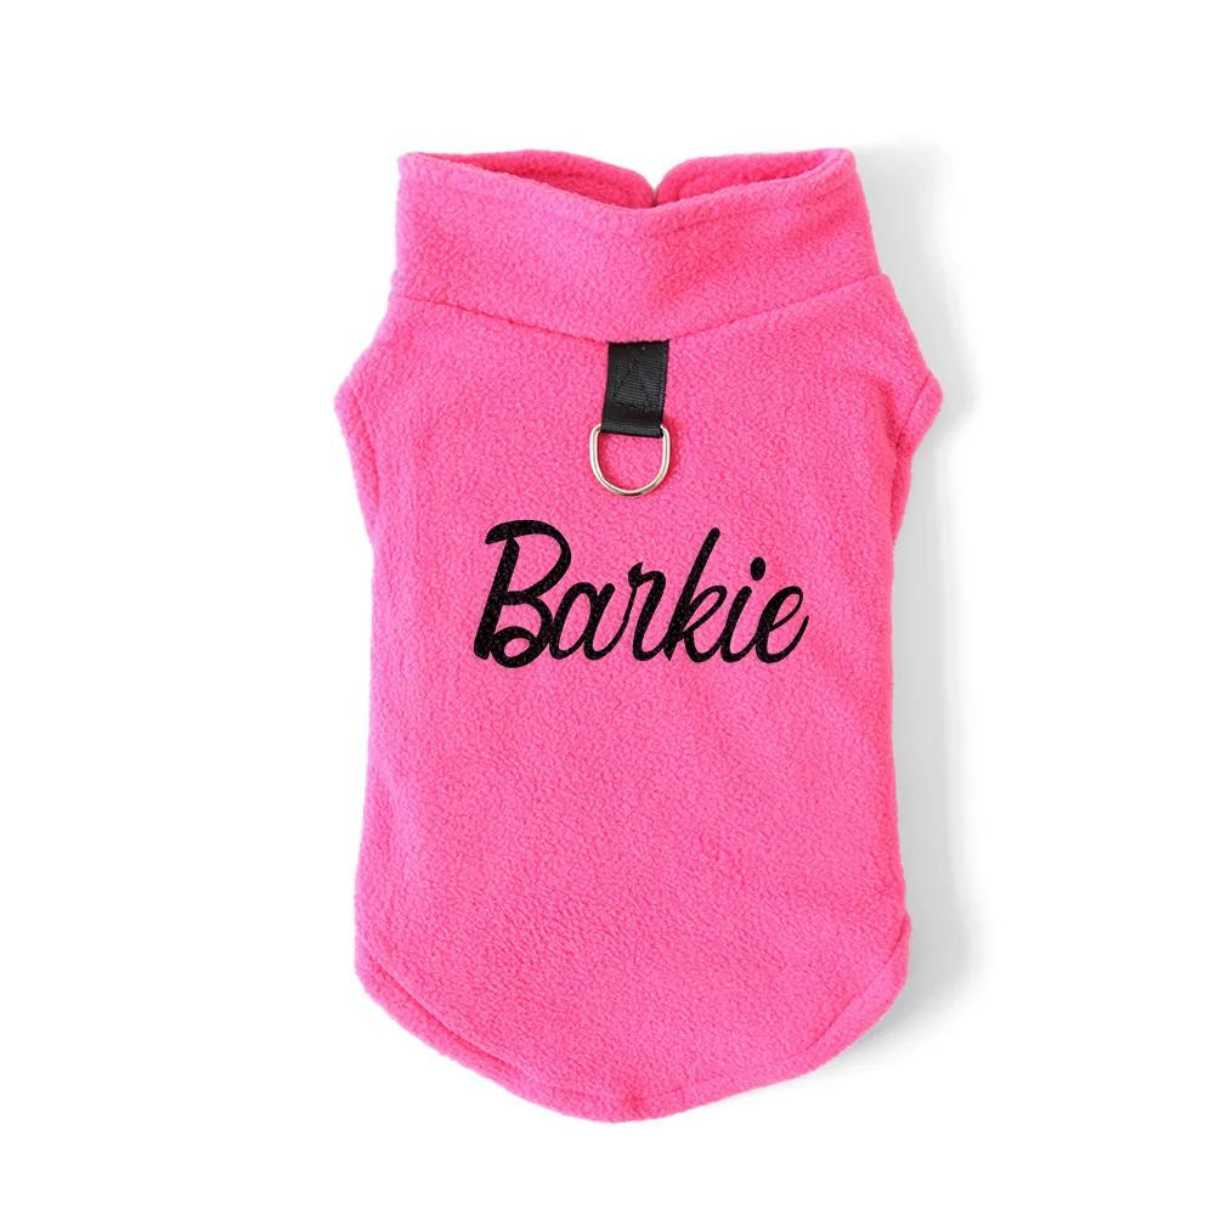 Pink barkie vest, jacket, clothes for dogs with black writing on the back. Has a attachable lead holder